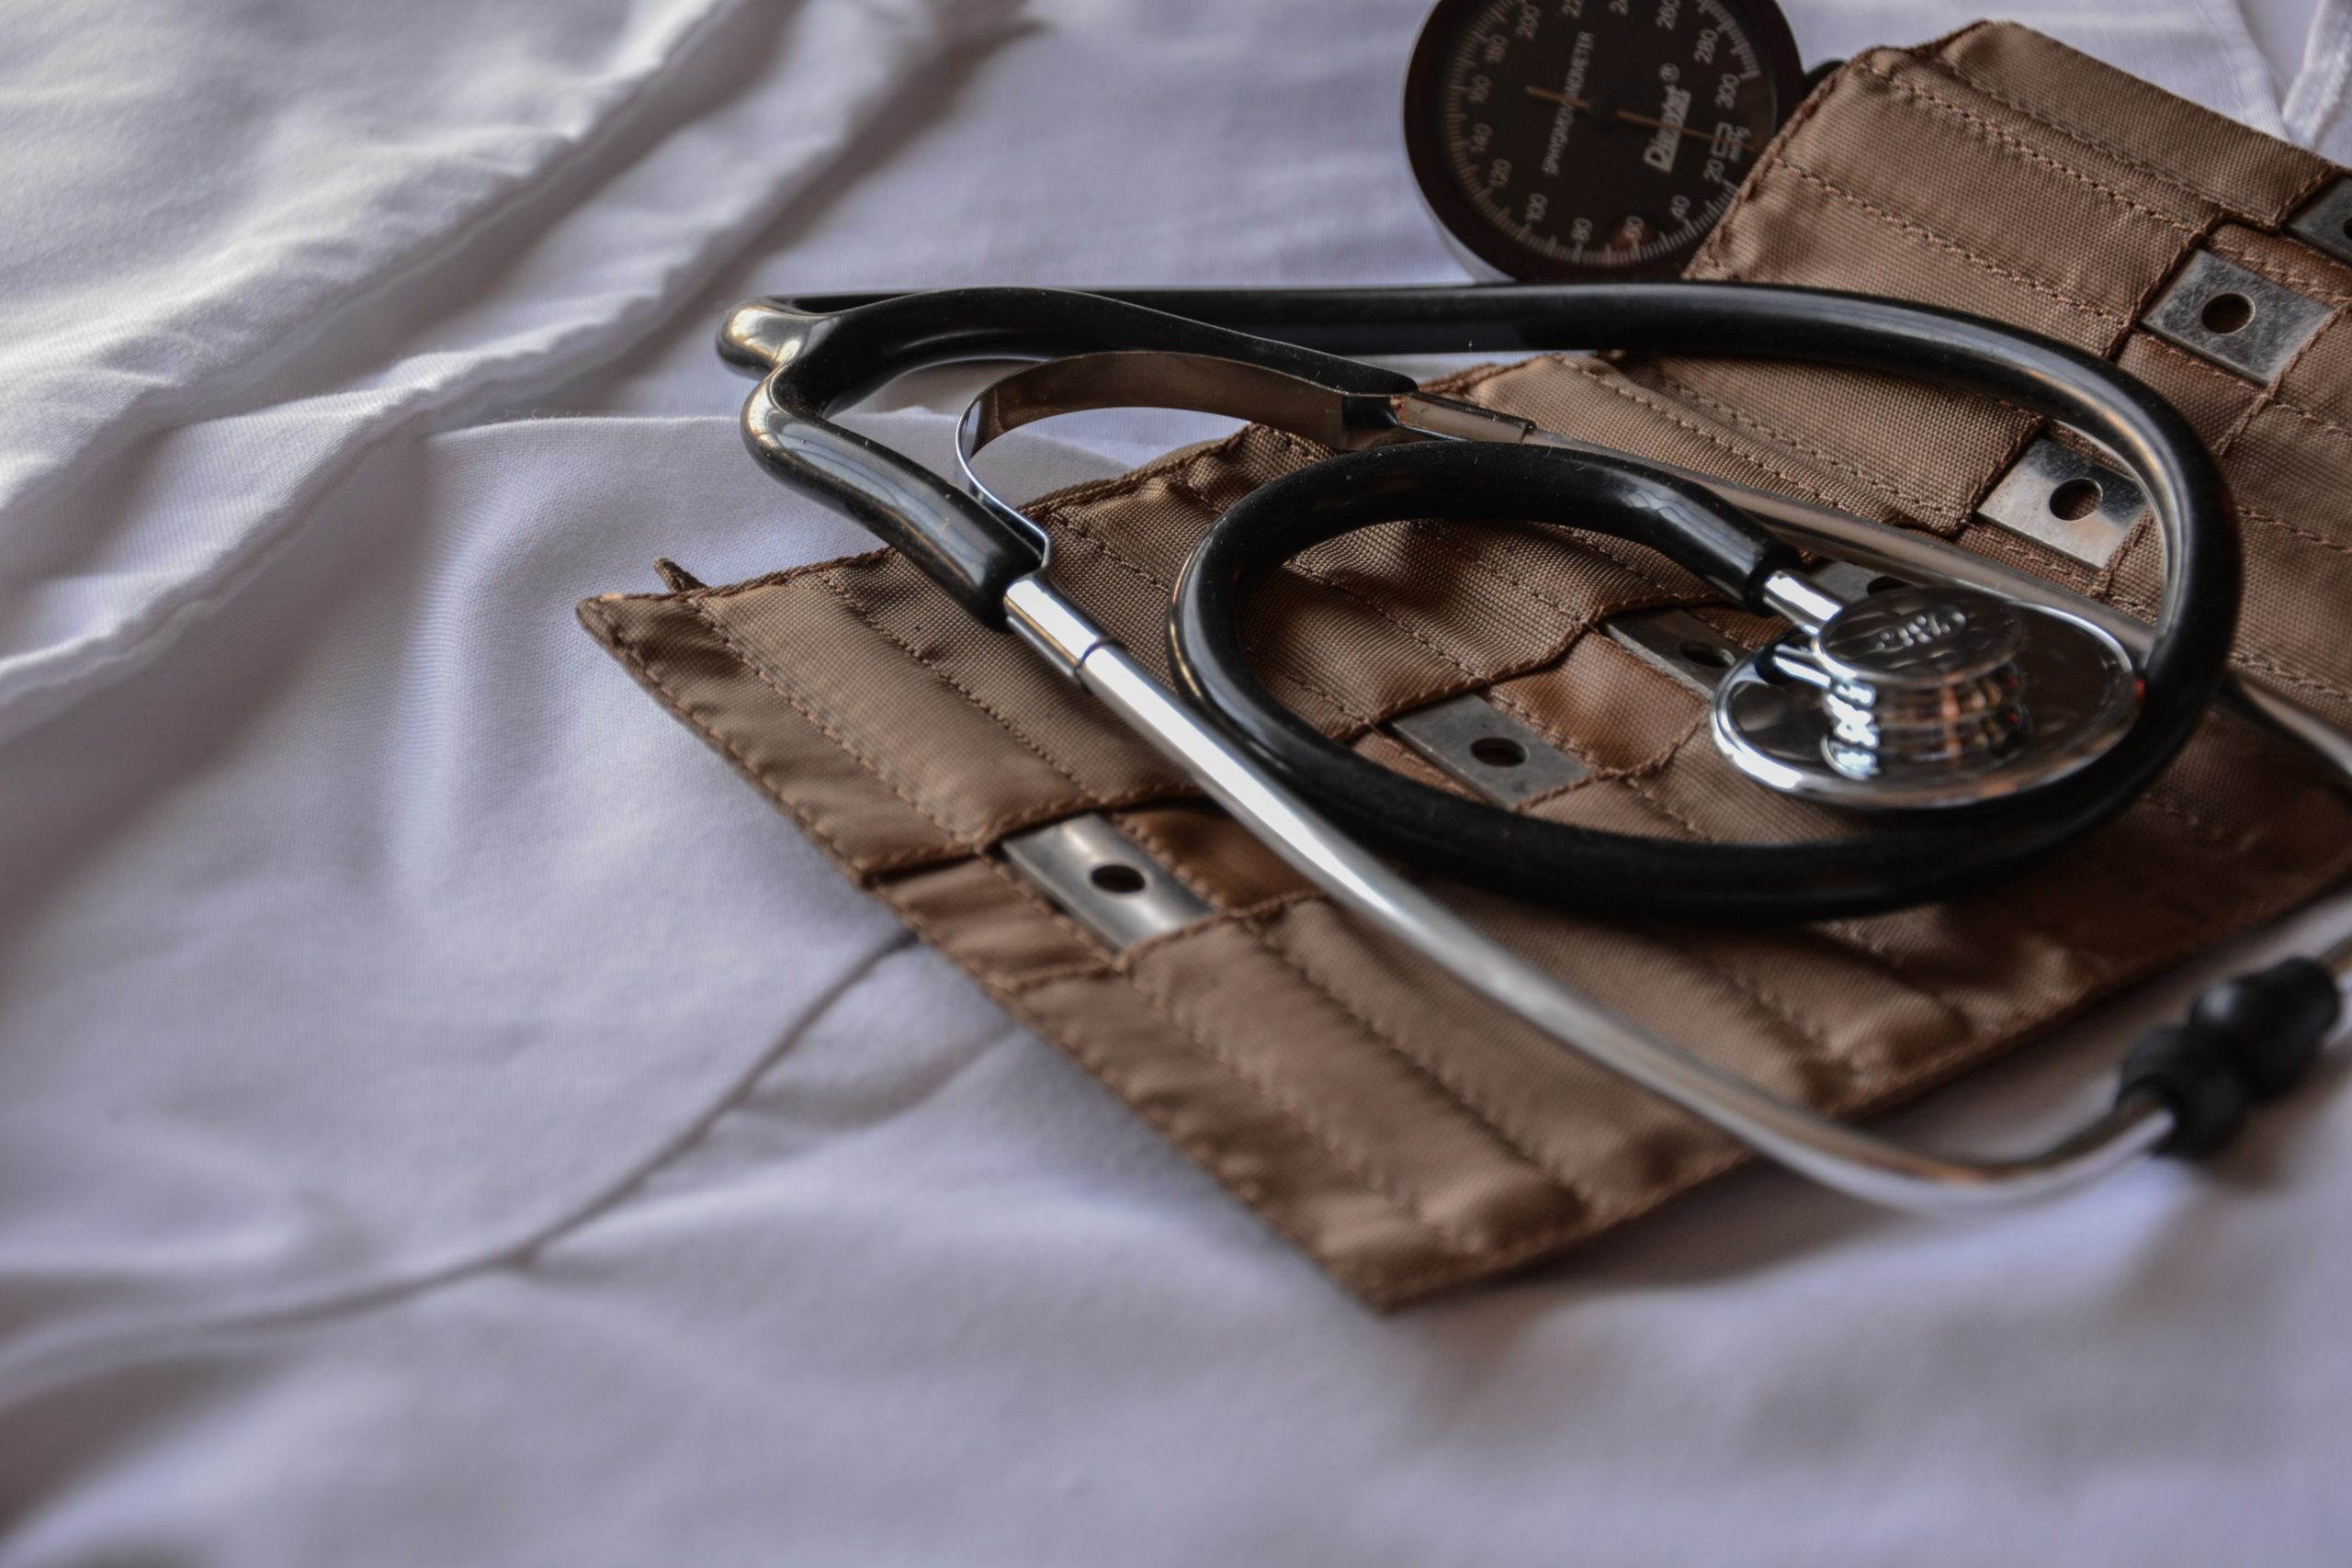 Stethoscope and sphygmomanometer (device for measuring blood pressure)